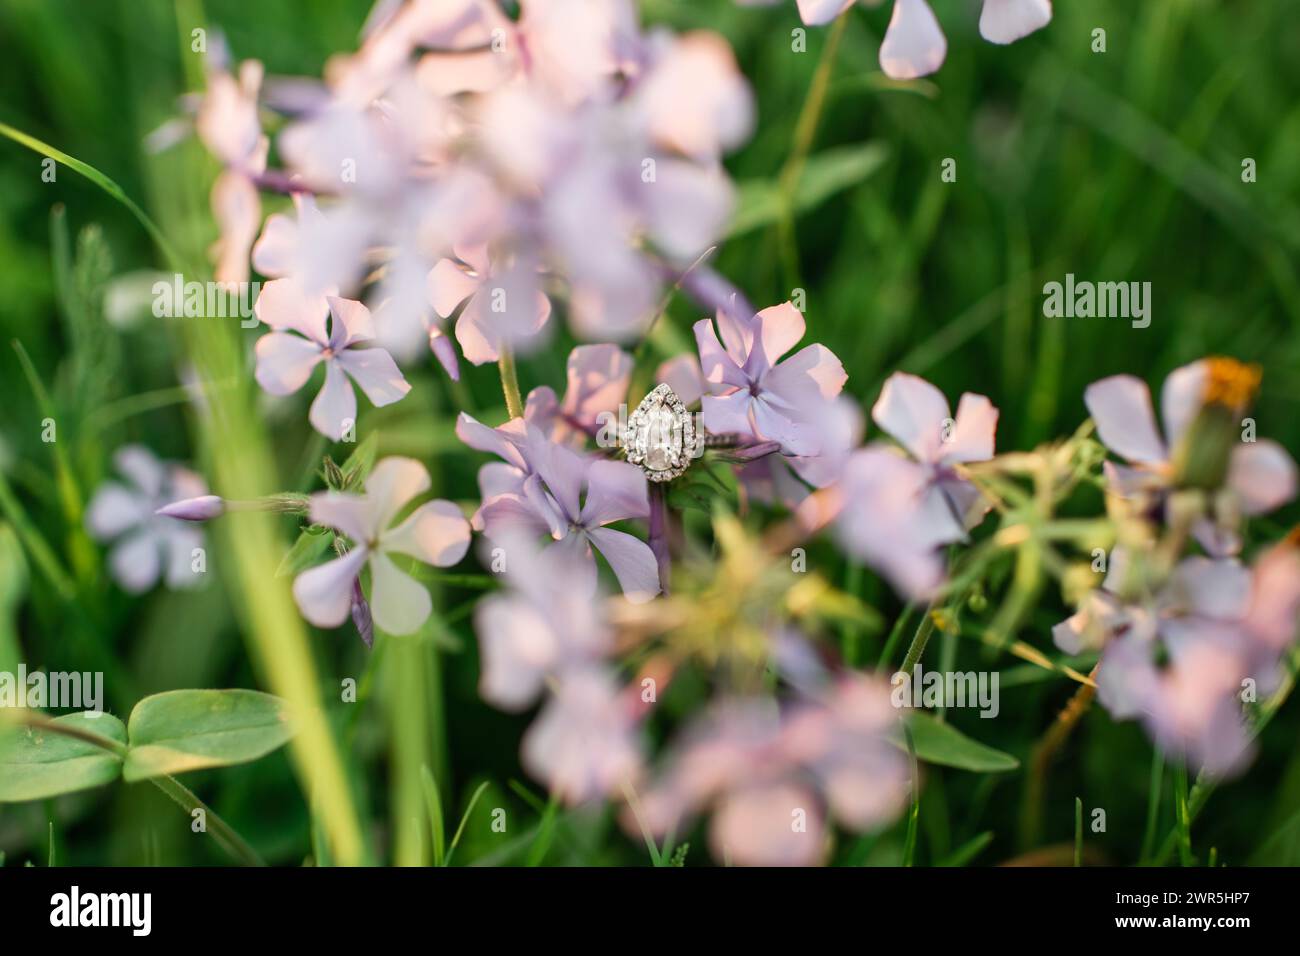 Beautiful engagement ring in purple flowers in green grass Stock Photo